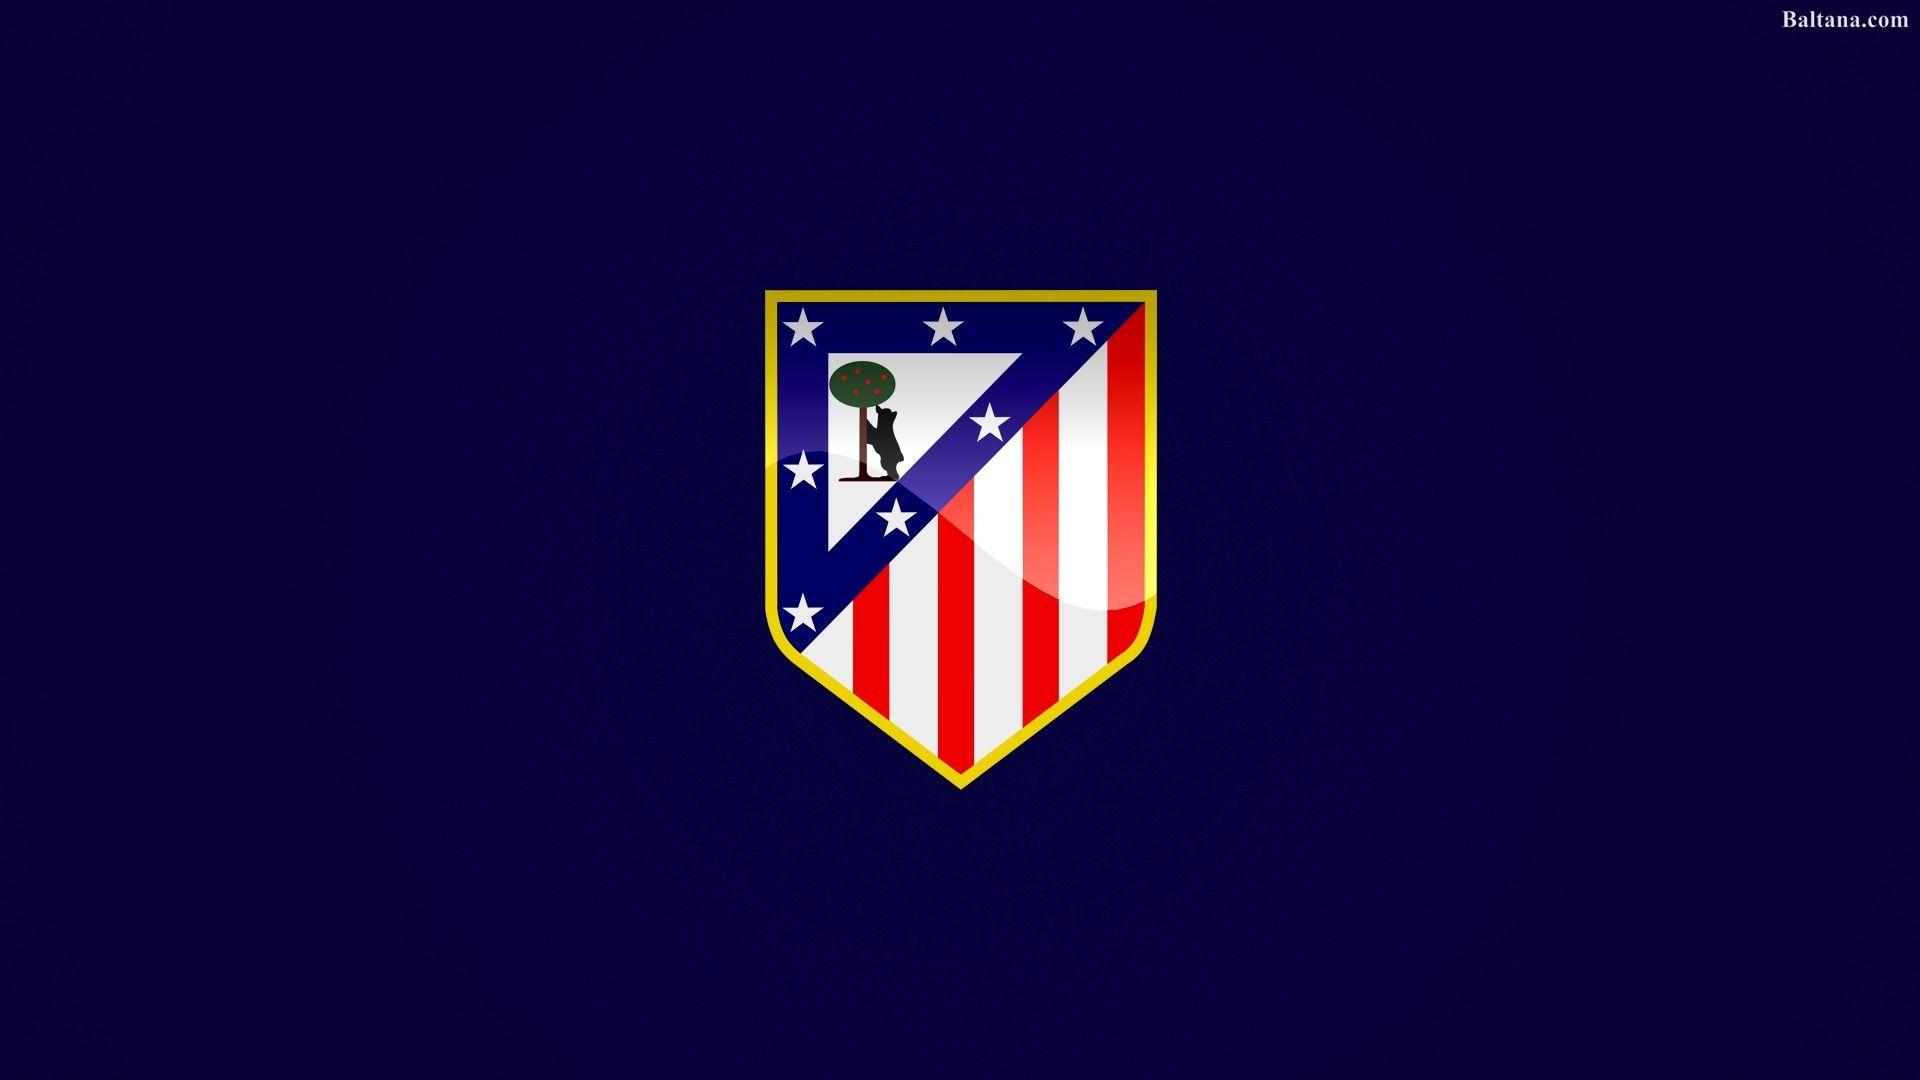 Atletico Madrid Wallpapers 2K Backgrounds, Wallpaper, Pics, Photos Free